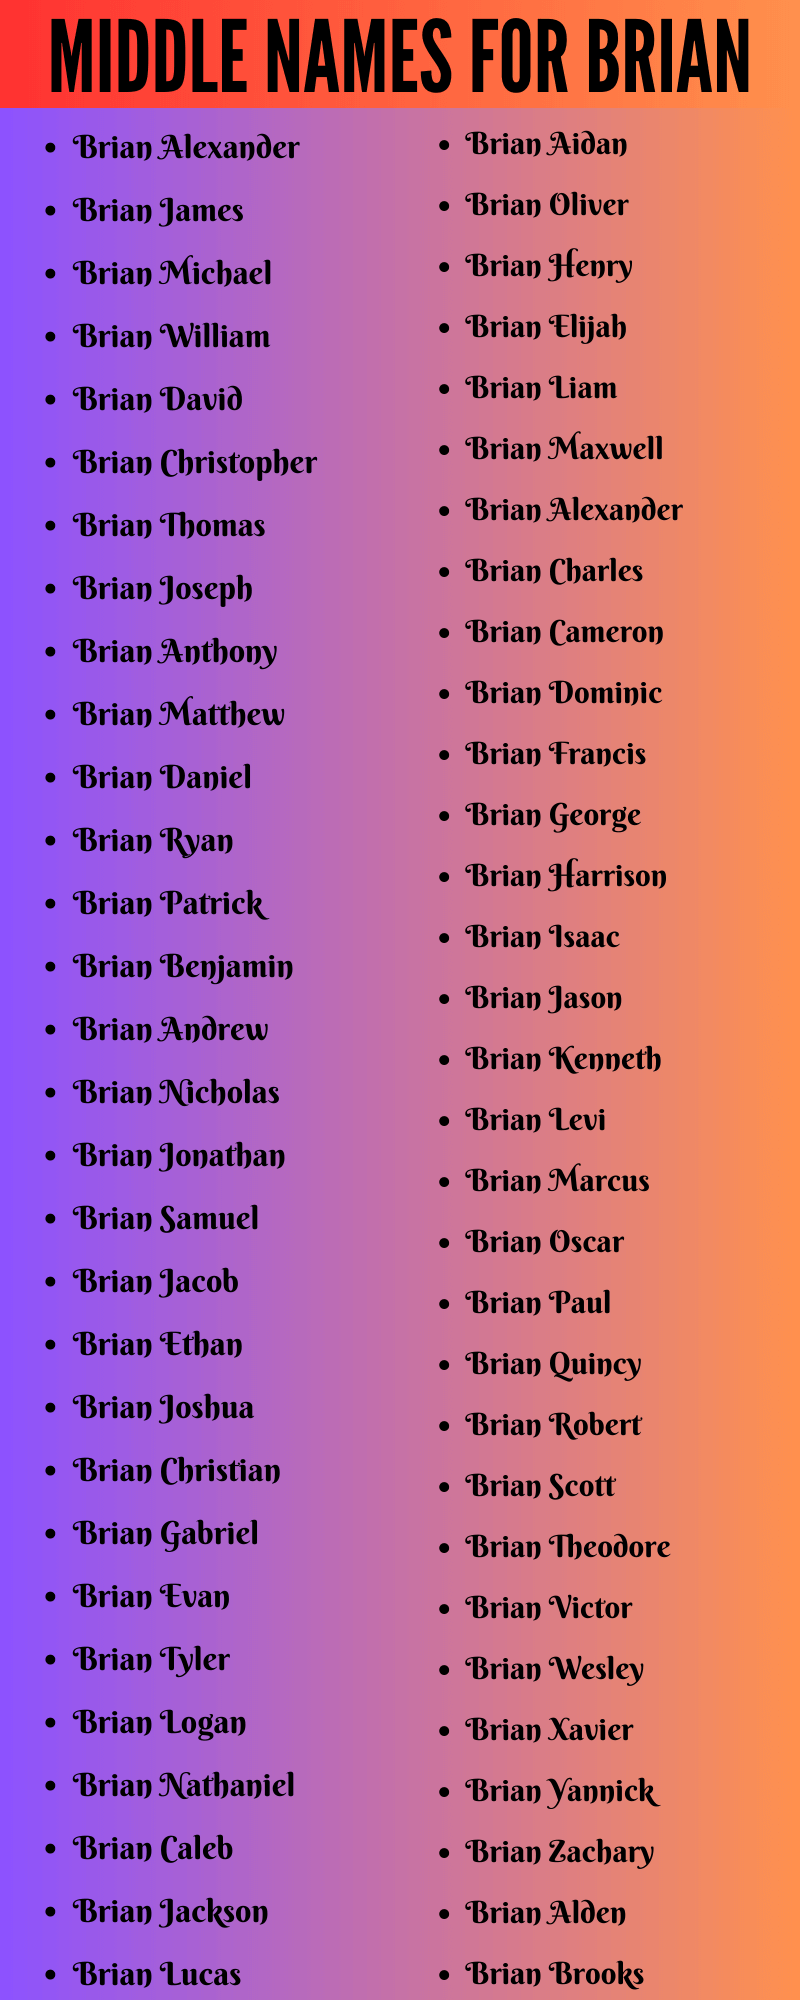 Middle Names For Brian